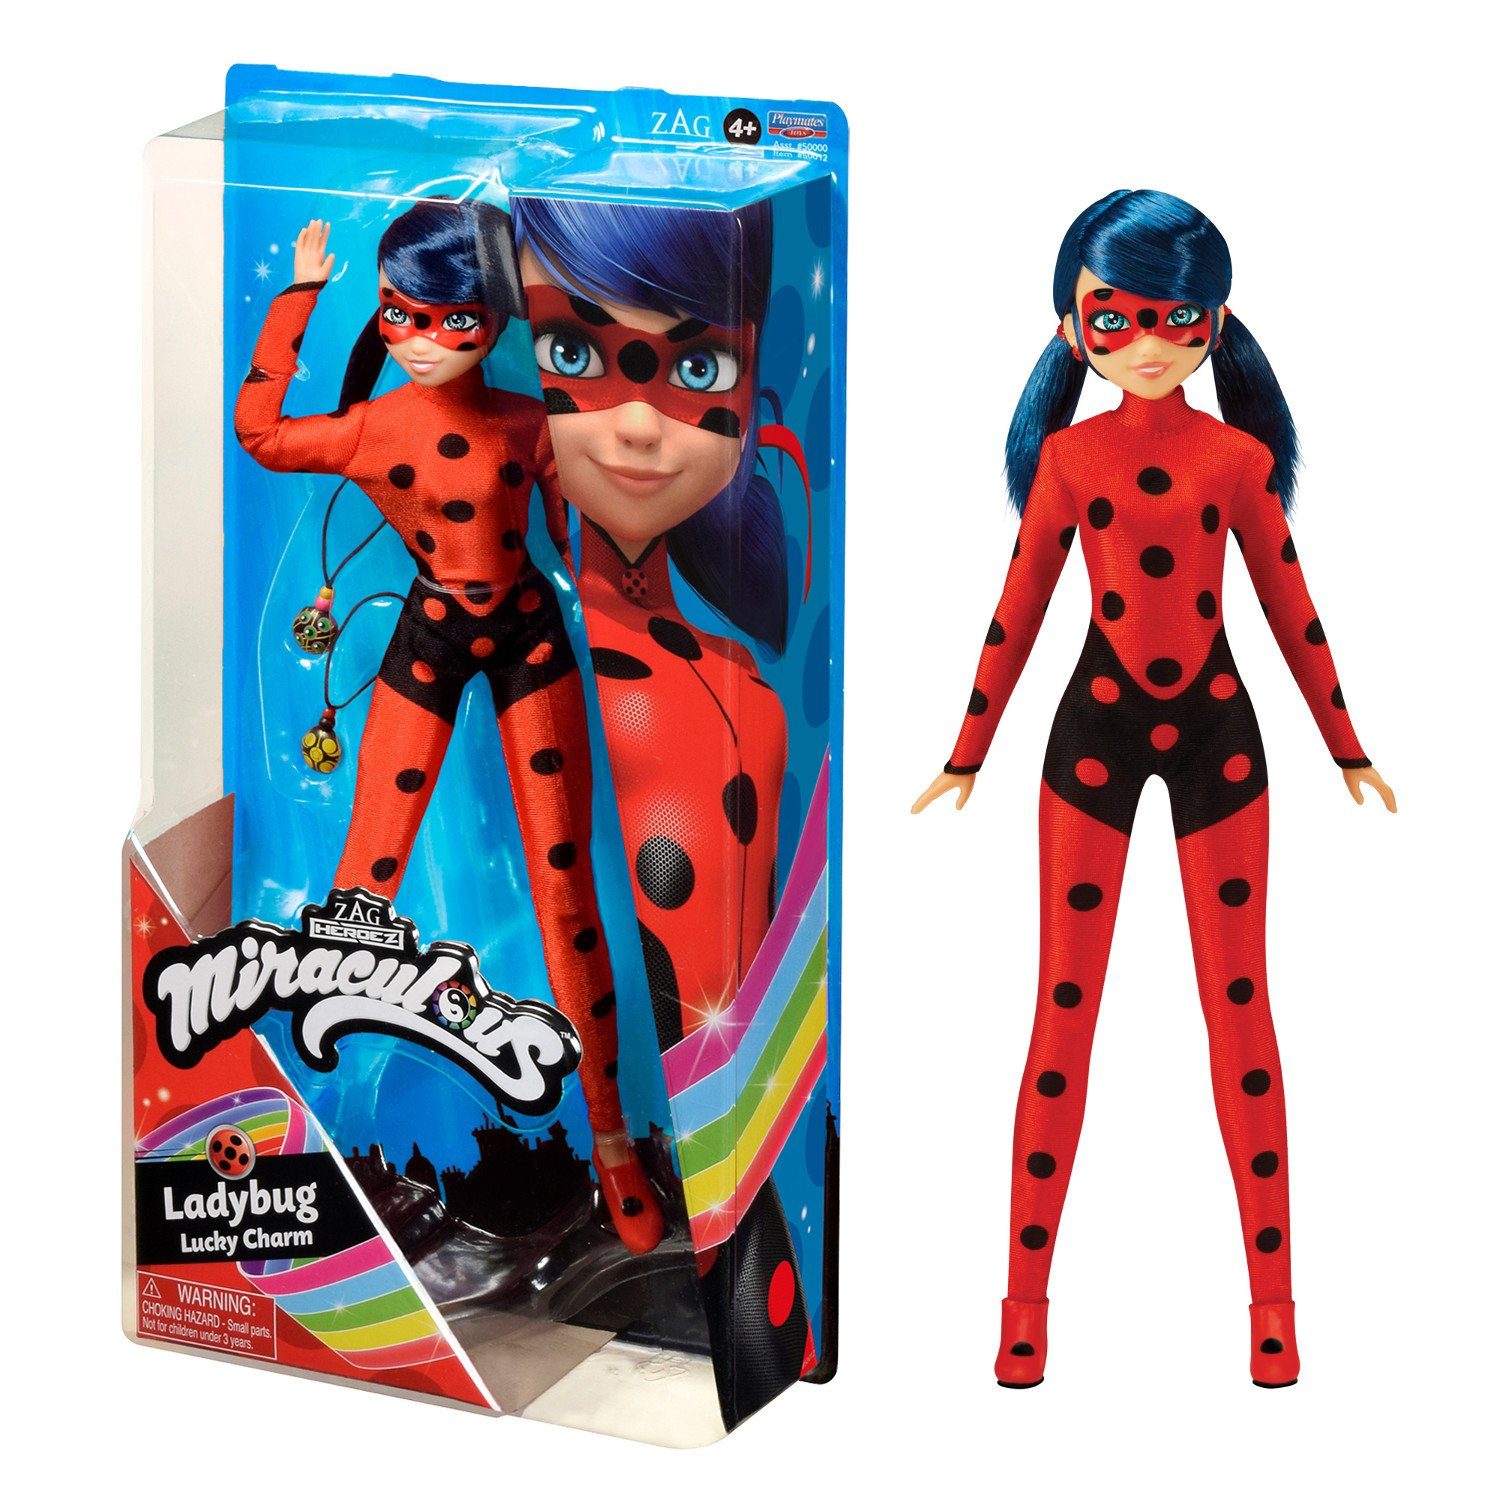 Playmates Toys Anziehpuppe 50012, Miraculous Puppe Ladybug Lucky Charm